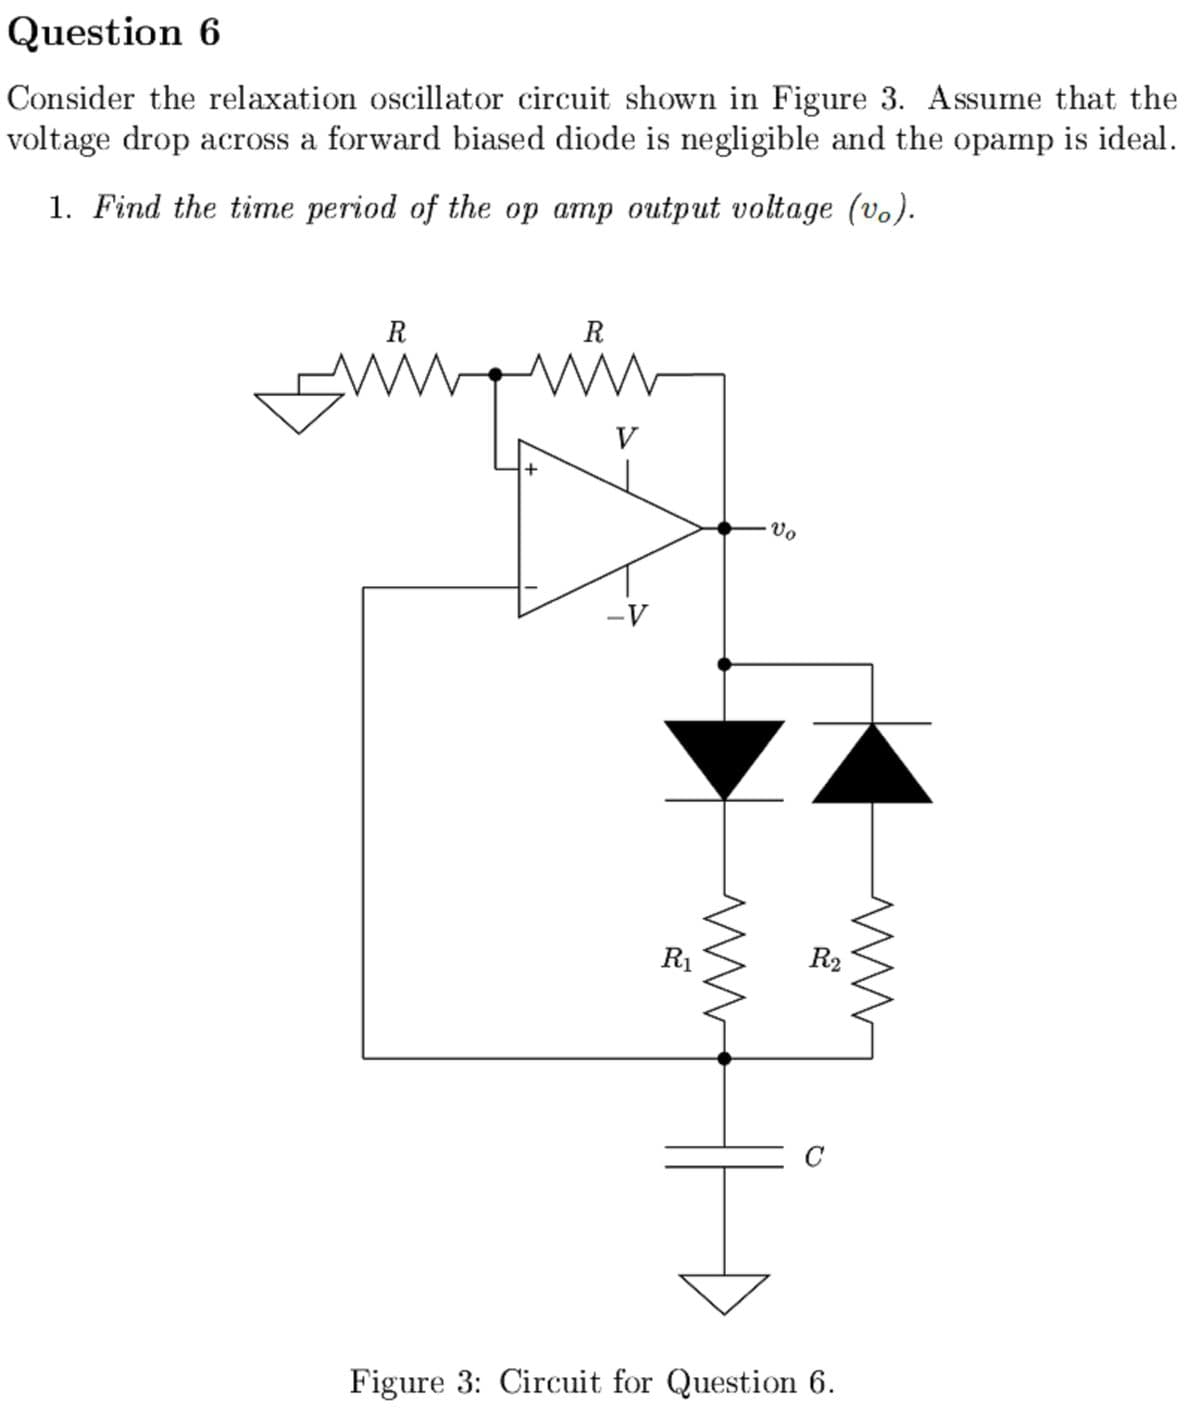 Question 6
Consider the relaxation oscillator circuit shown in Figure 3. Assume that the
voltage drop across a forward biased diode is negligible and the opamp is ideal.
1. Find the time period of the op amp output voltage (vo).
R
R
www.
+
V
-V
R₁
ww
·Vo
7
R2
Figure 3: Circuit for Question 6.